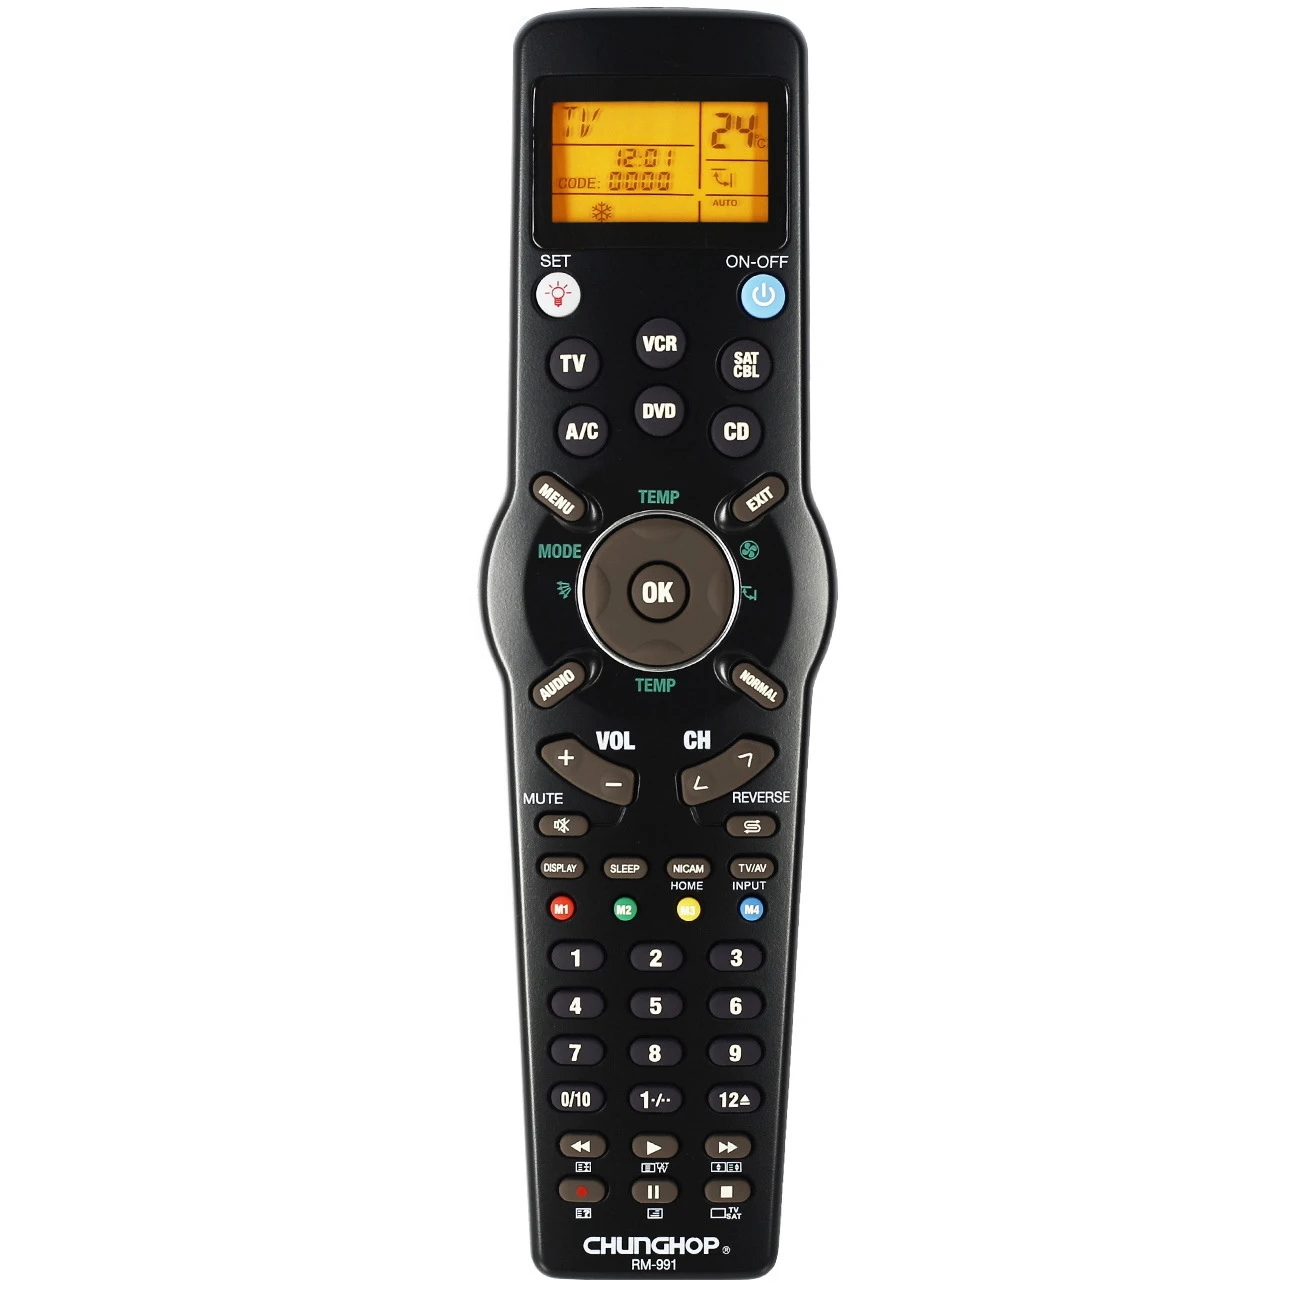 

CHUNGHOP RM991 Smart Universal Remote Control Multifunctional Learning Remote Control for TV/TXT,DVD CD,VCR,SAT/CABLE and A/C